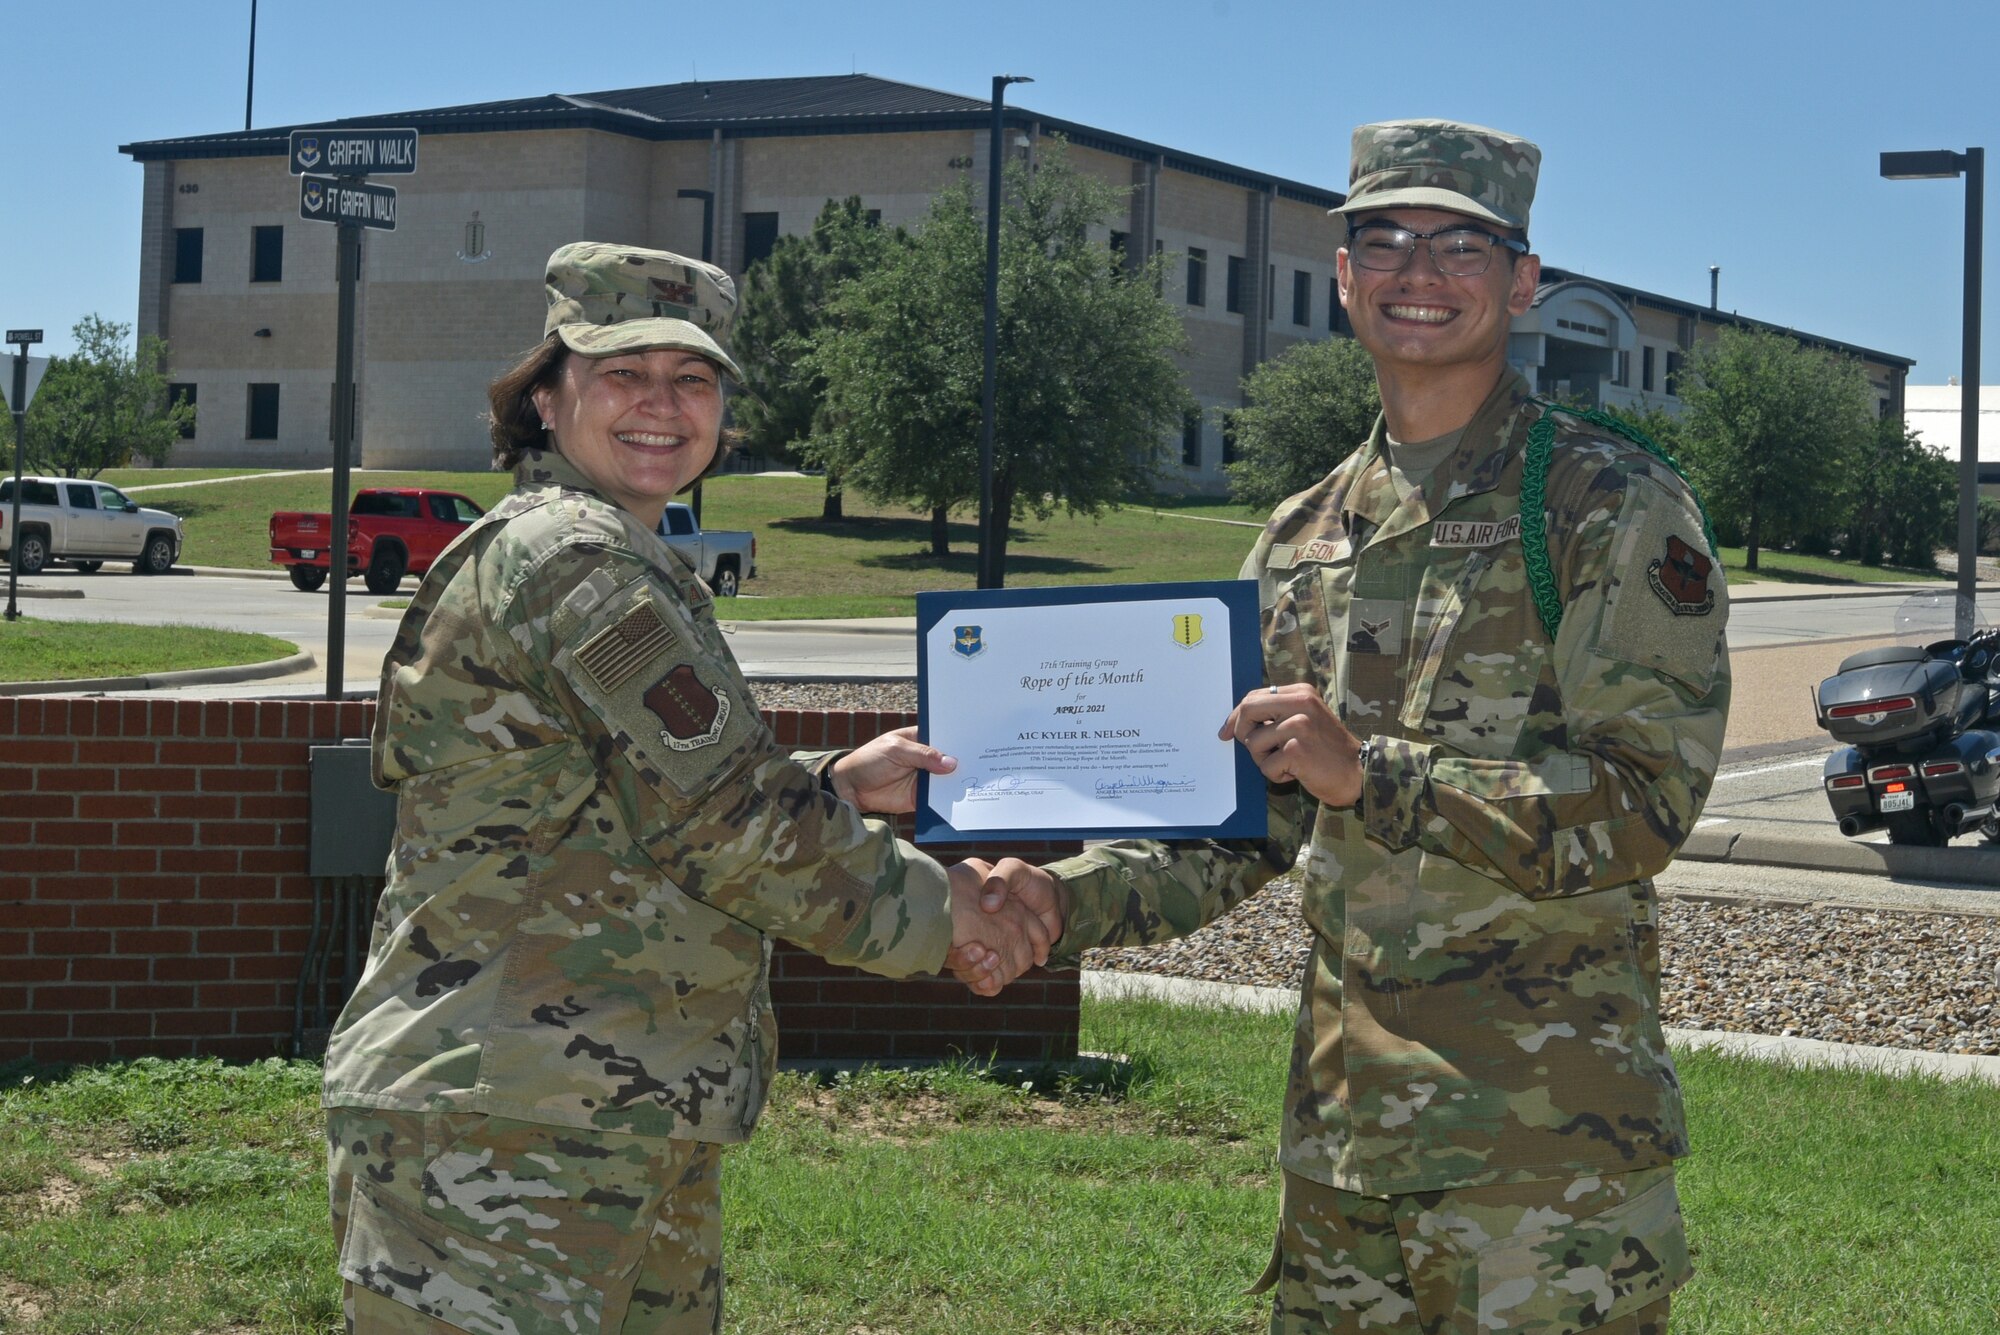 U.S. Air Force Col. Angelina Maguinness, 17th Training Group commander, presents Airman 1st Class Kyler Nelson, 315th Training Squadron student, the 17th TRG Rope of the Month award for April 2021, outside of the Brandenburg Hall on Goodfellow Air Force Base, Texas, May 21, 2021. Military Training Leaders present different ropes to Airmen who display exceptional qualities to lead their peers. Nelson was recognized for his hard work and dedication in his rope duties. (U.S. Air Force photo by Senior Airman Ashley Thrash)